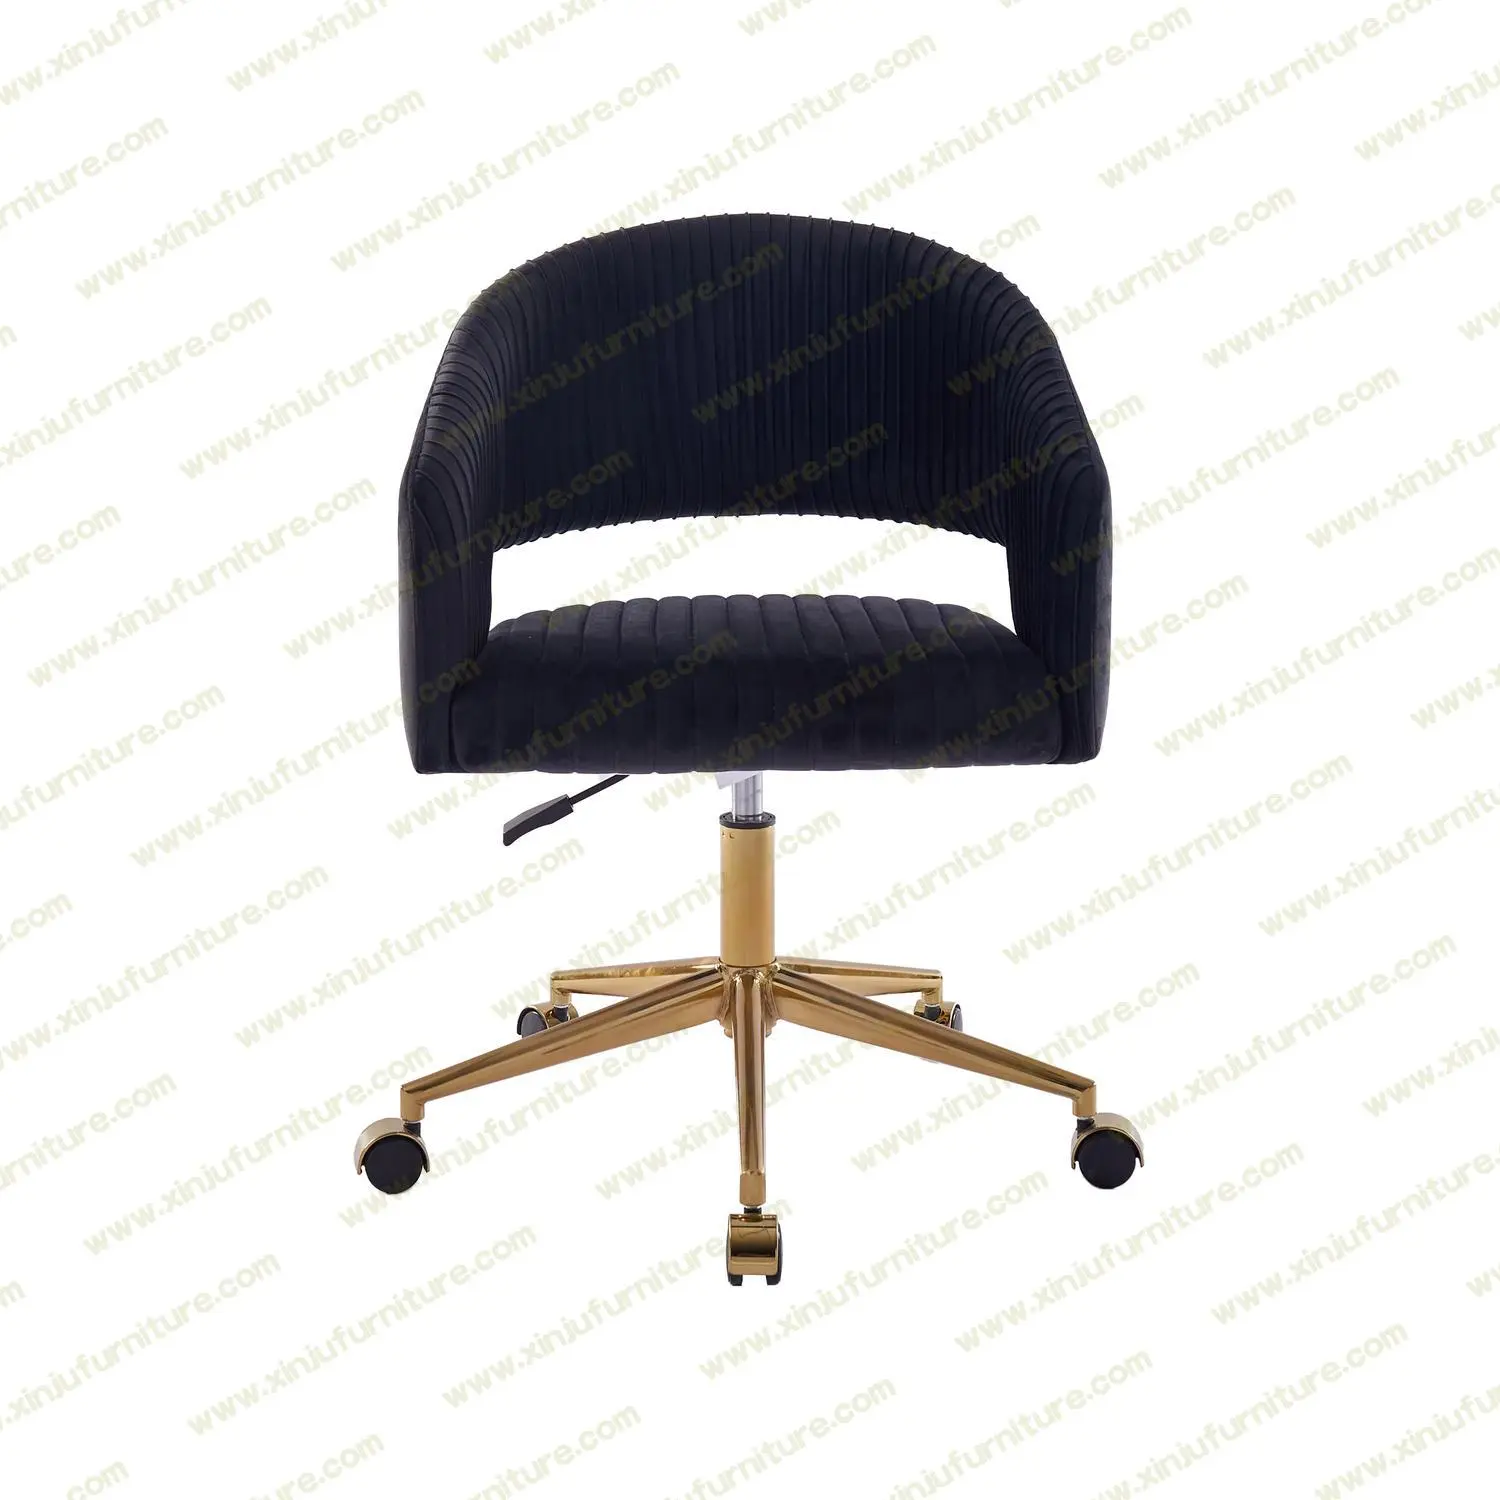 Simple removable tufted office chair Stripe Black